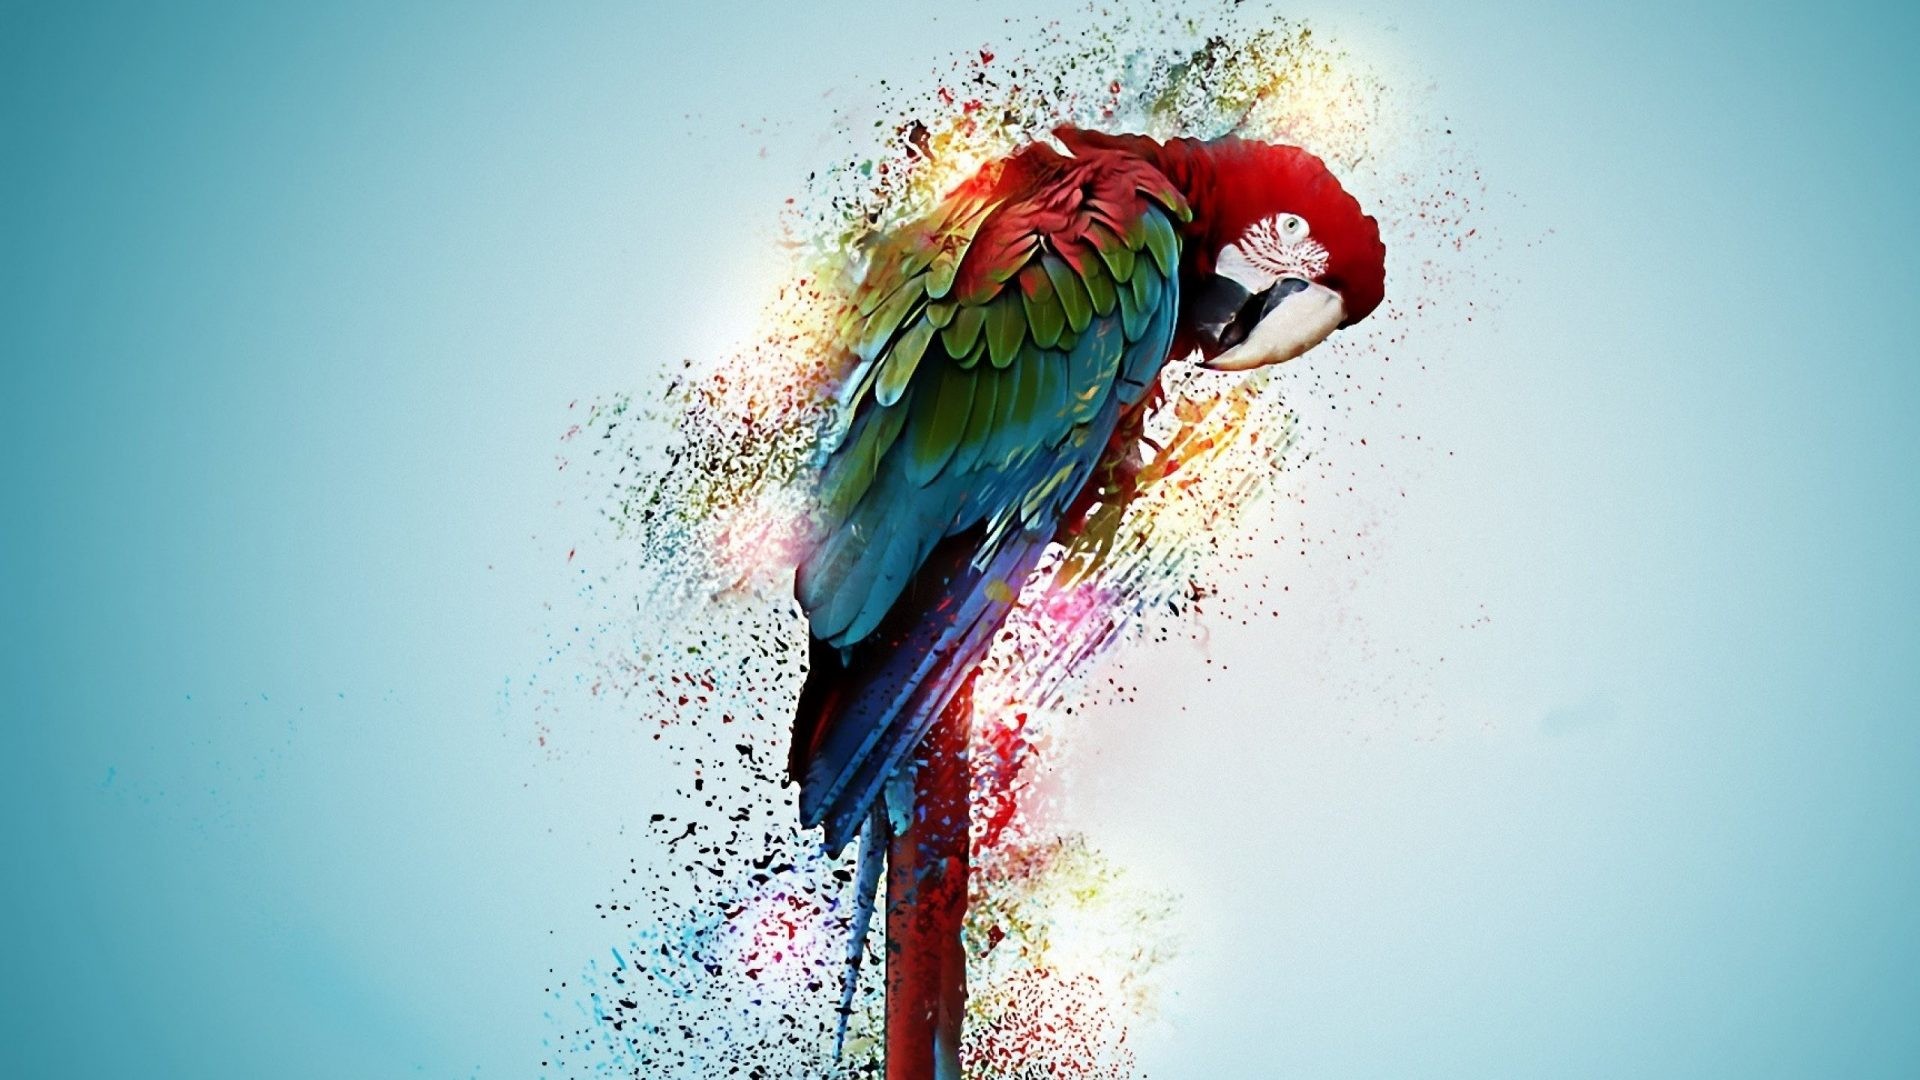 1920x1080 Birds - Parrot Artwork Psychedelic Tropical Art Bird Macaw Kiwi Background  for HD 16:9